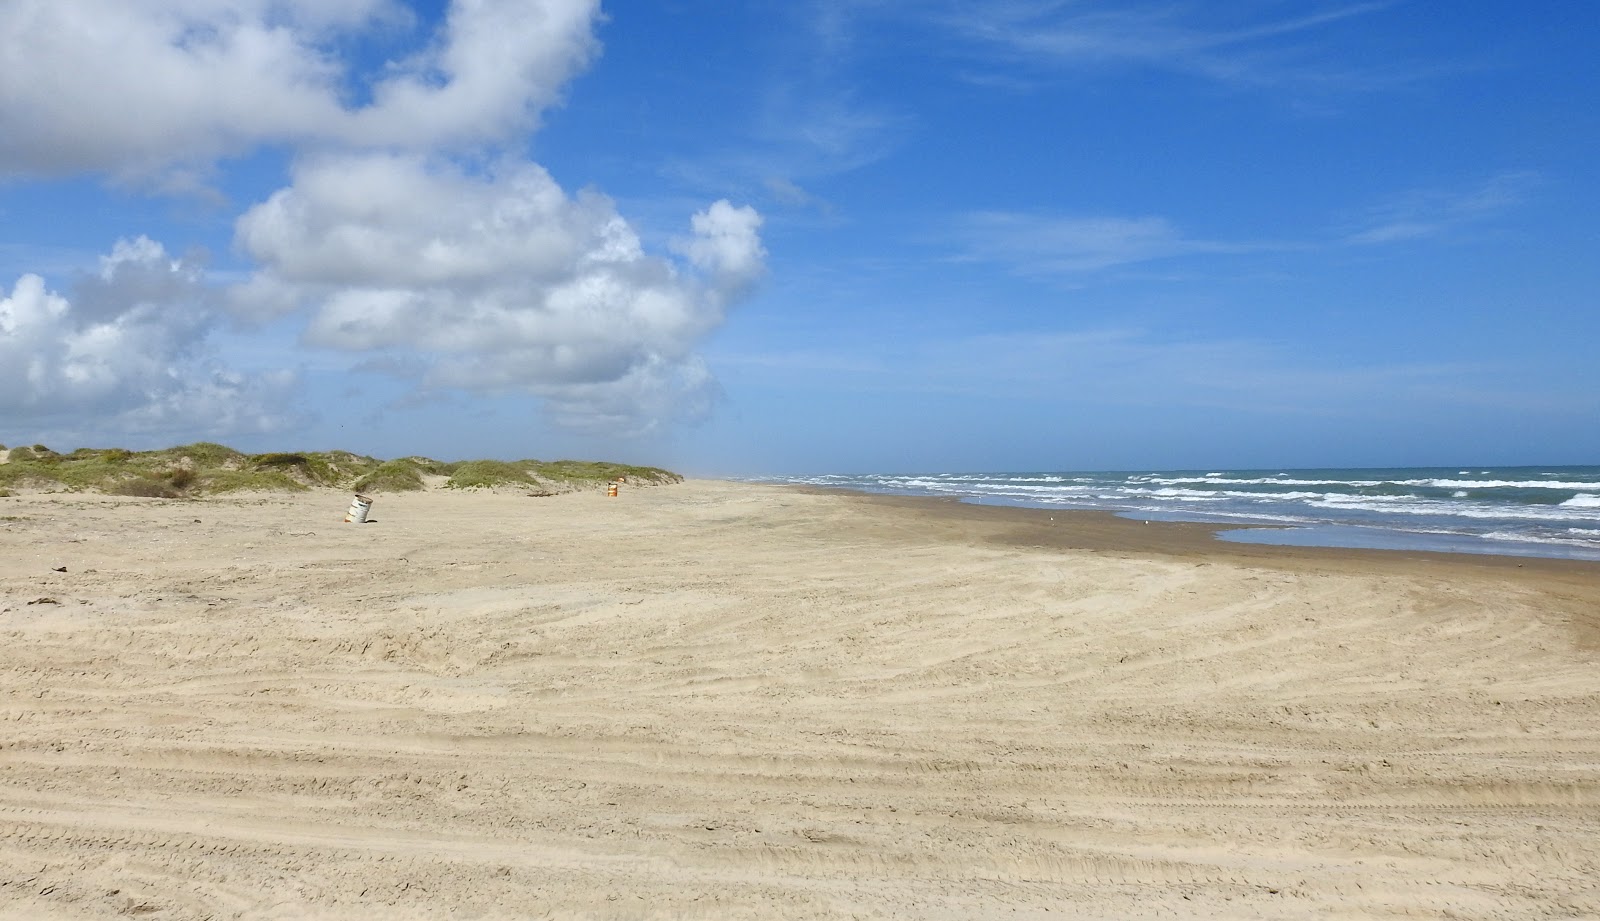 Photo of Boca Chica beach with gray sand surface